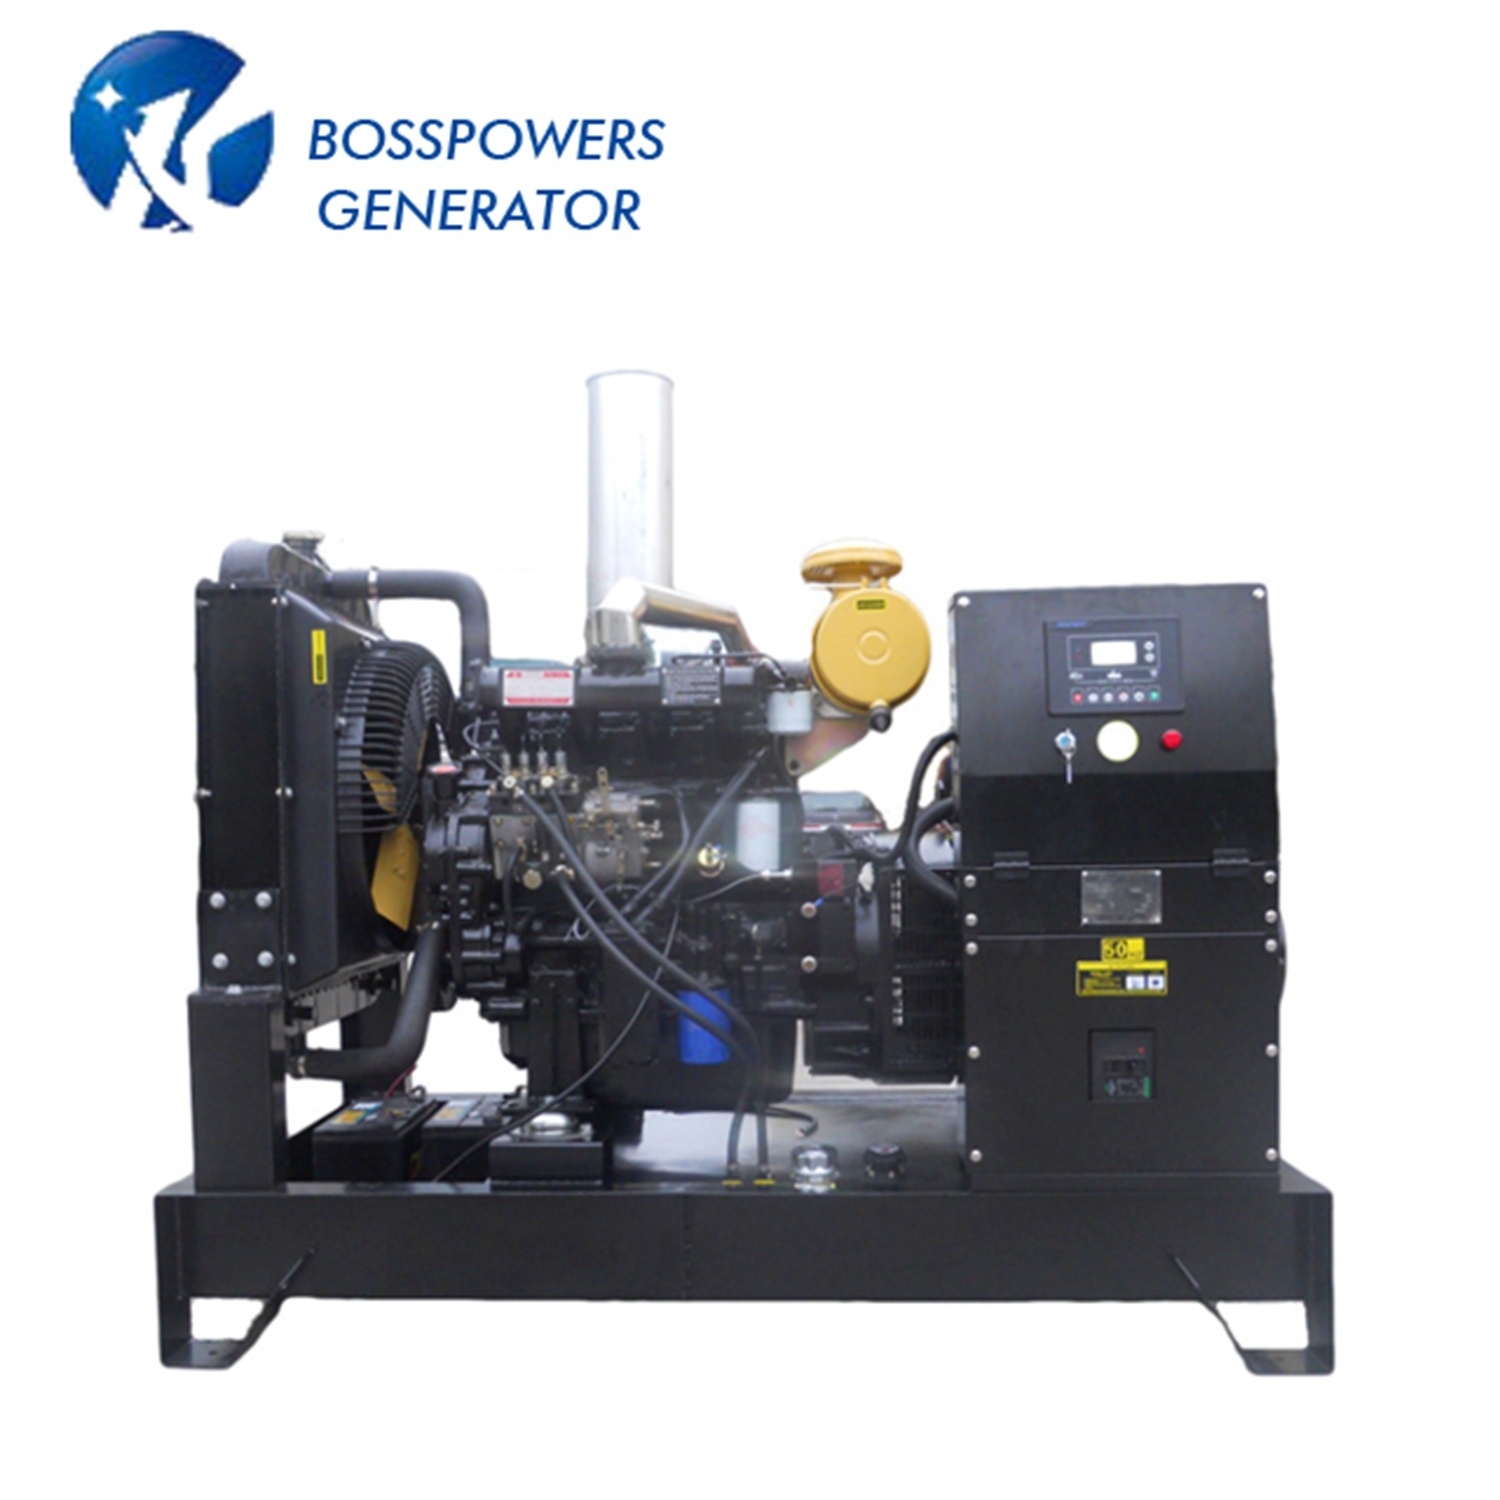 Containerized Diesel Generator Set Backup Use Powered by Kpv970